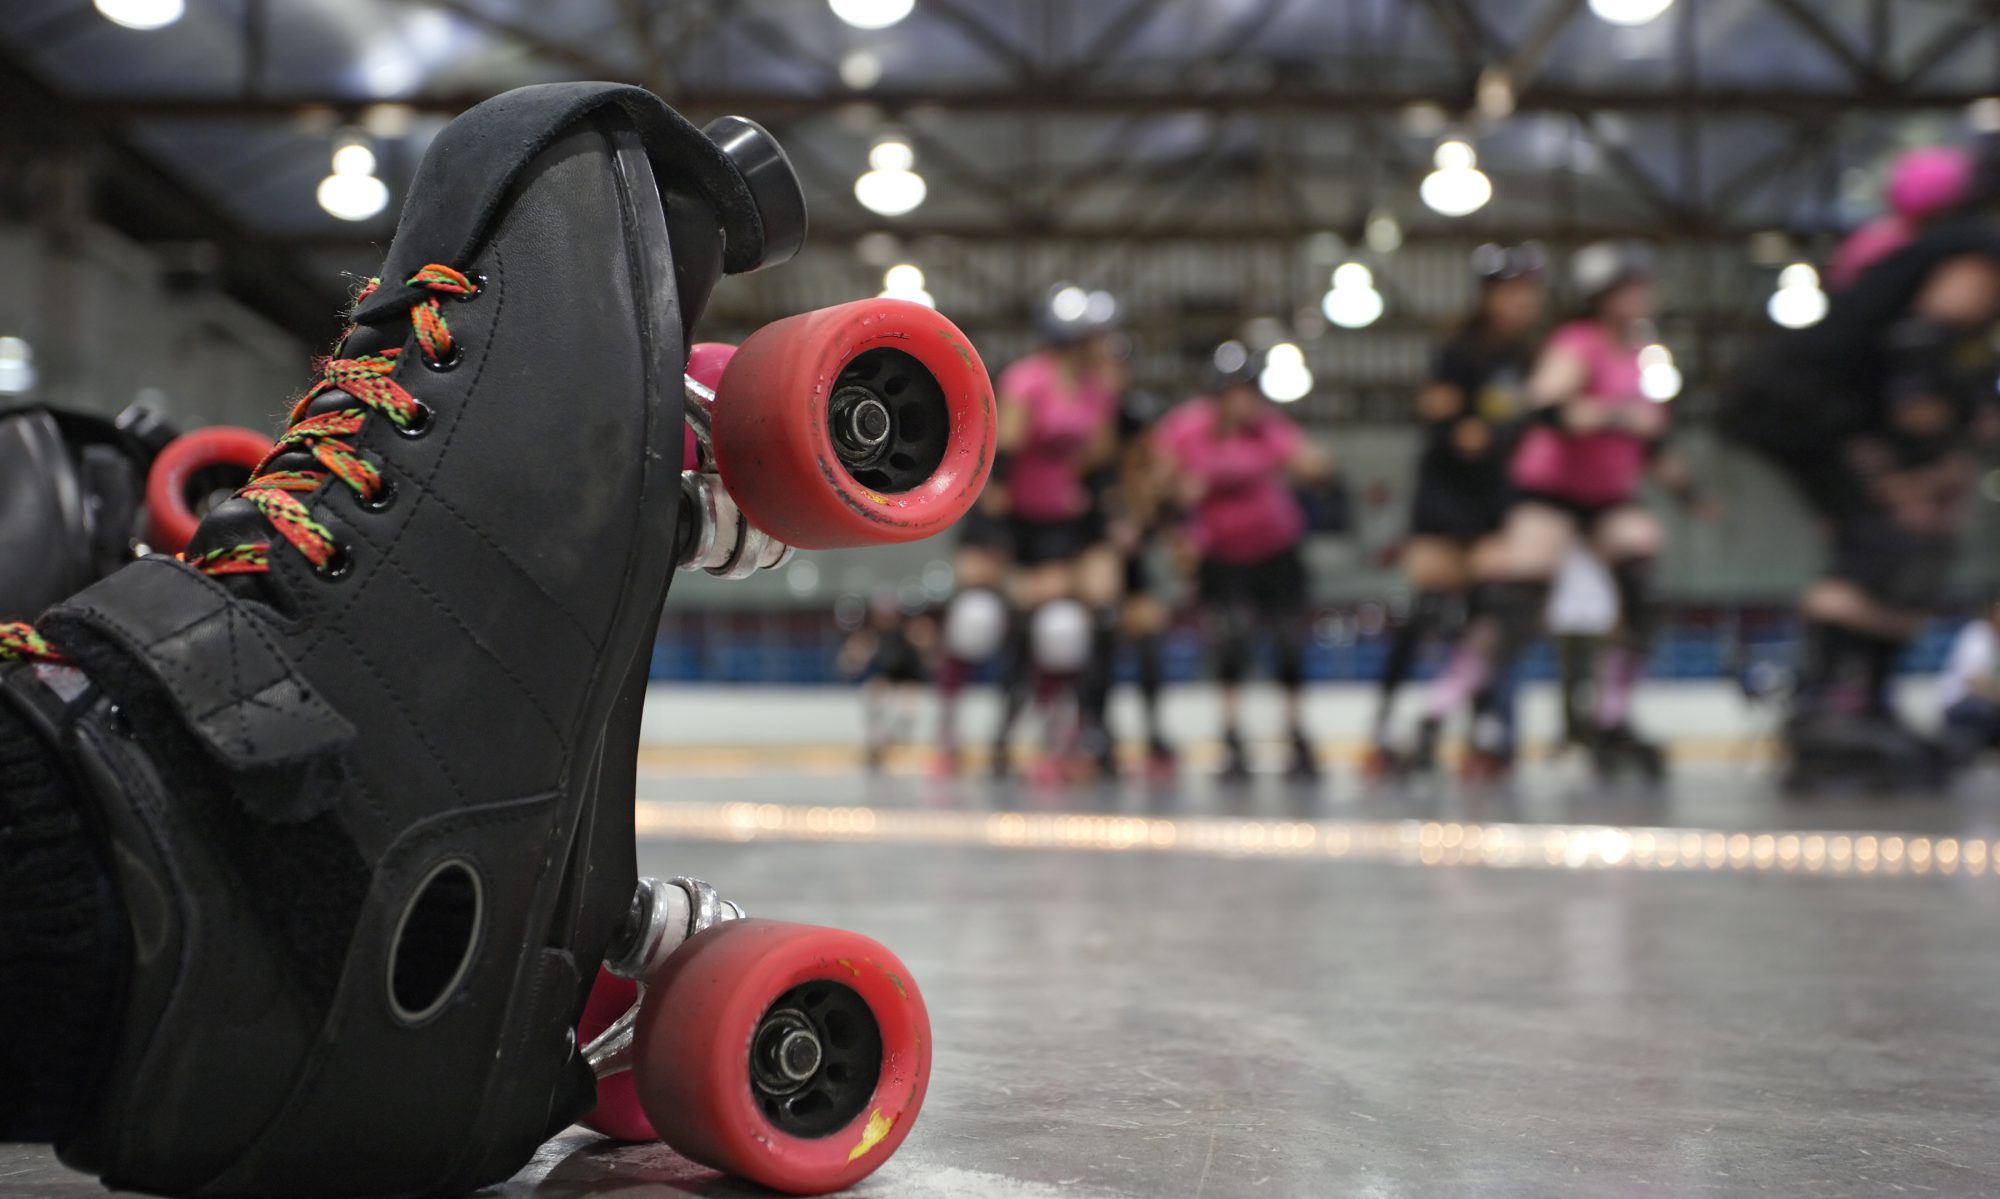 roller derby name picking tips - how to pick a skater name that rocks